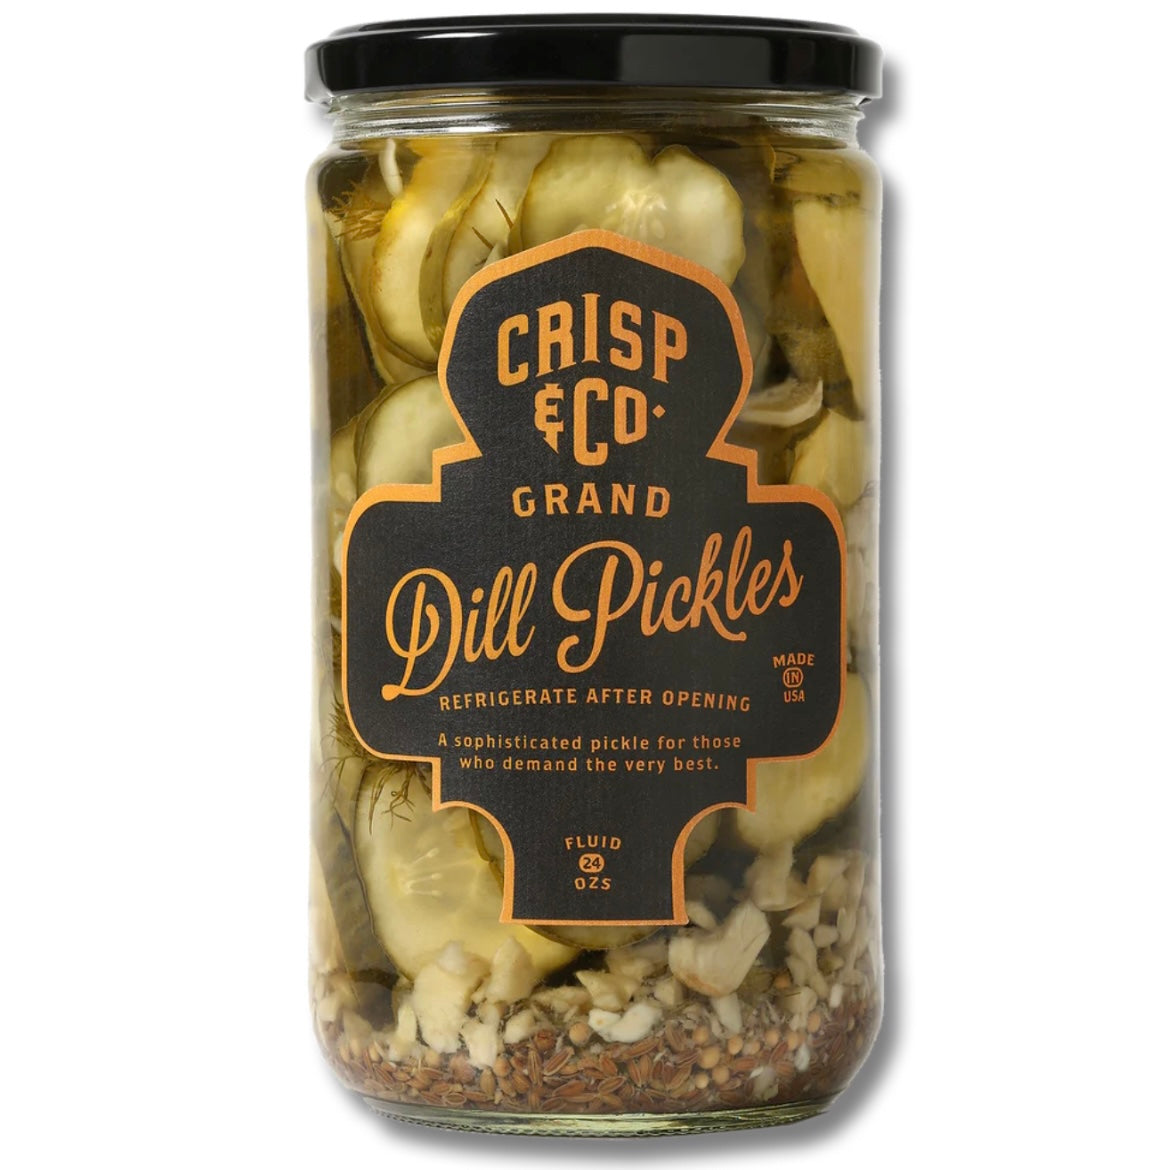 Grand Dill Pickles